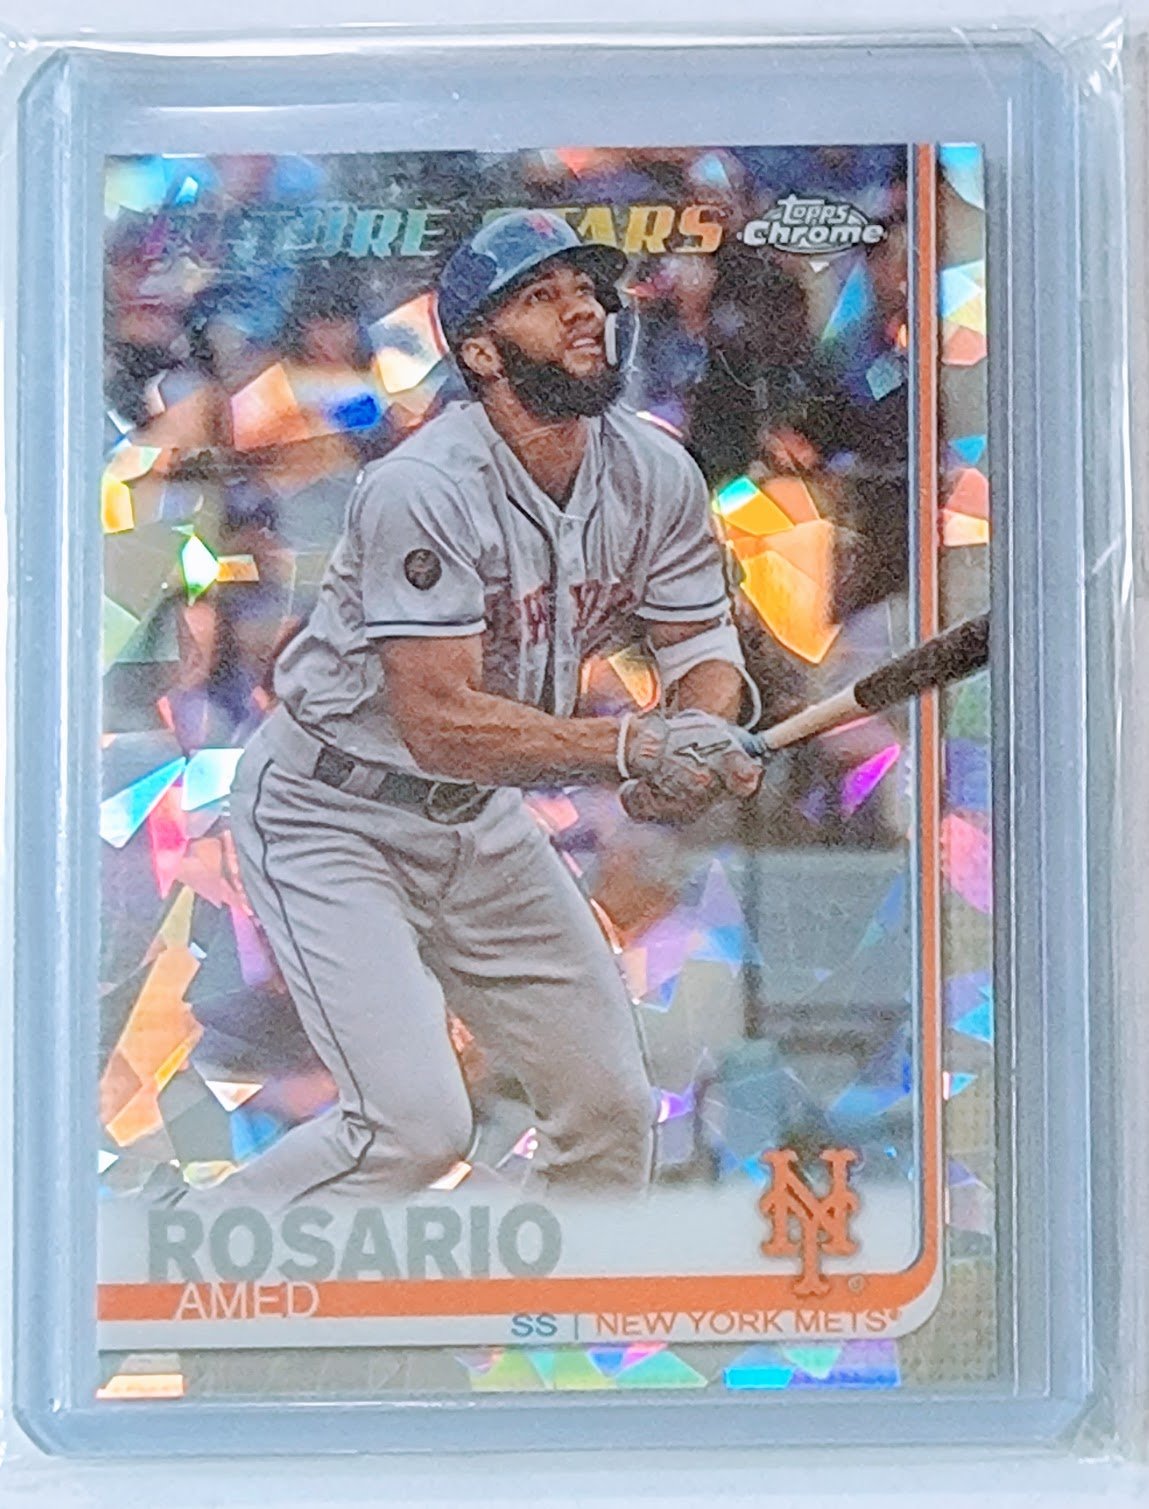 2019 Topps Chrome Sapphire Amed Rosario Future Stars Baseball Card simple Xclusive Collectibles   